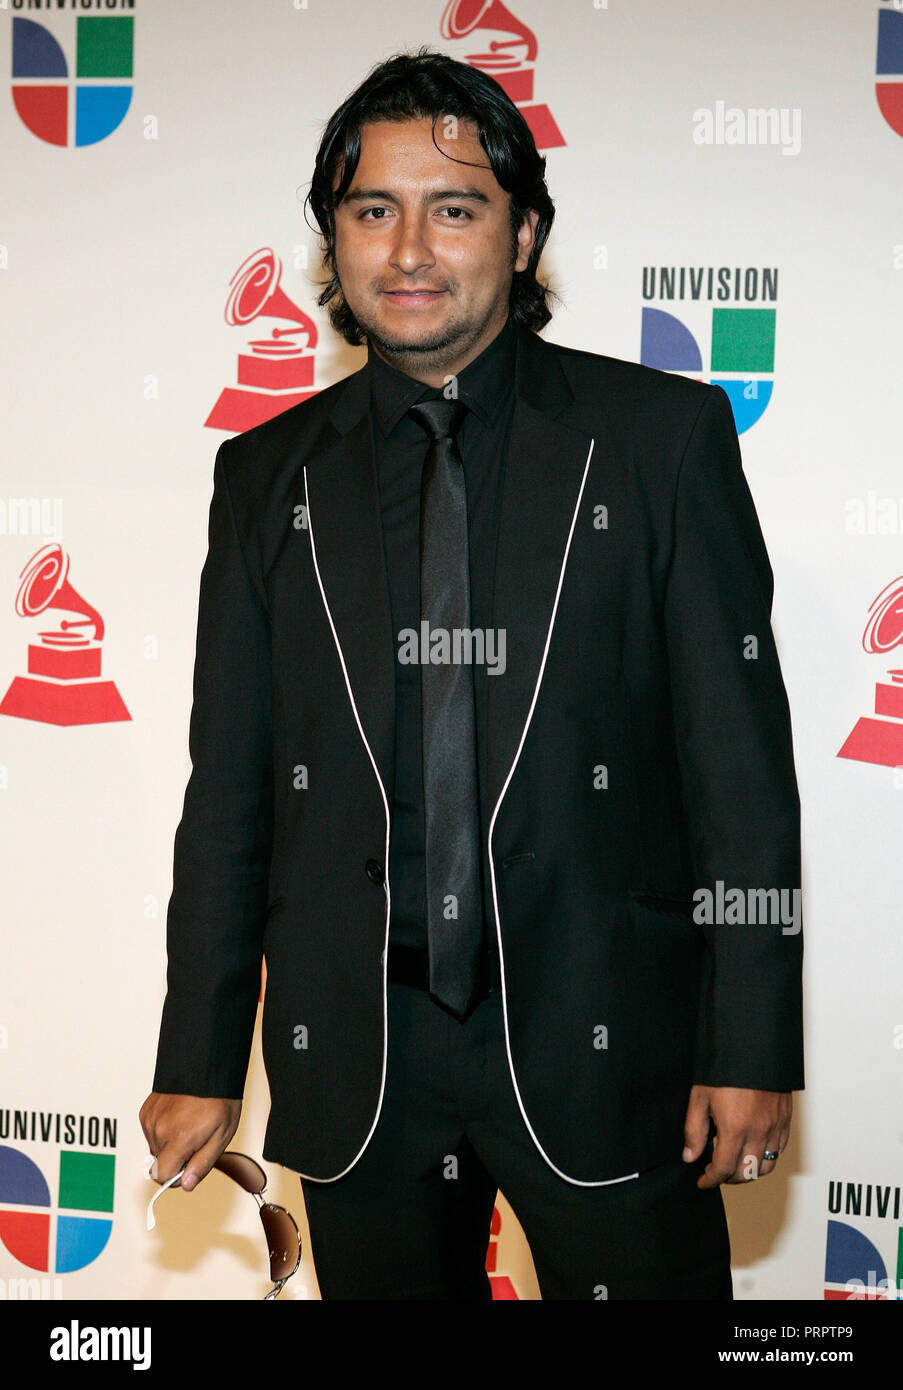 Alex Campos arrives at the 9th annual Latin Grammy Awards at the Toyota Center in Houston, Texas on November 13, 2008. Stock Photo